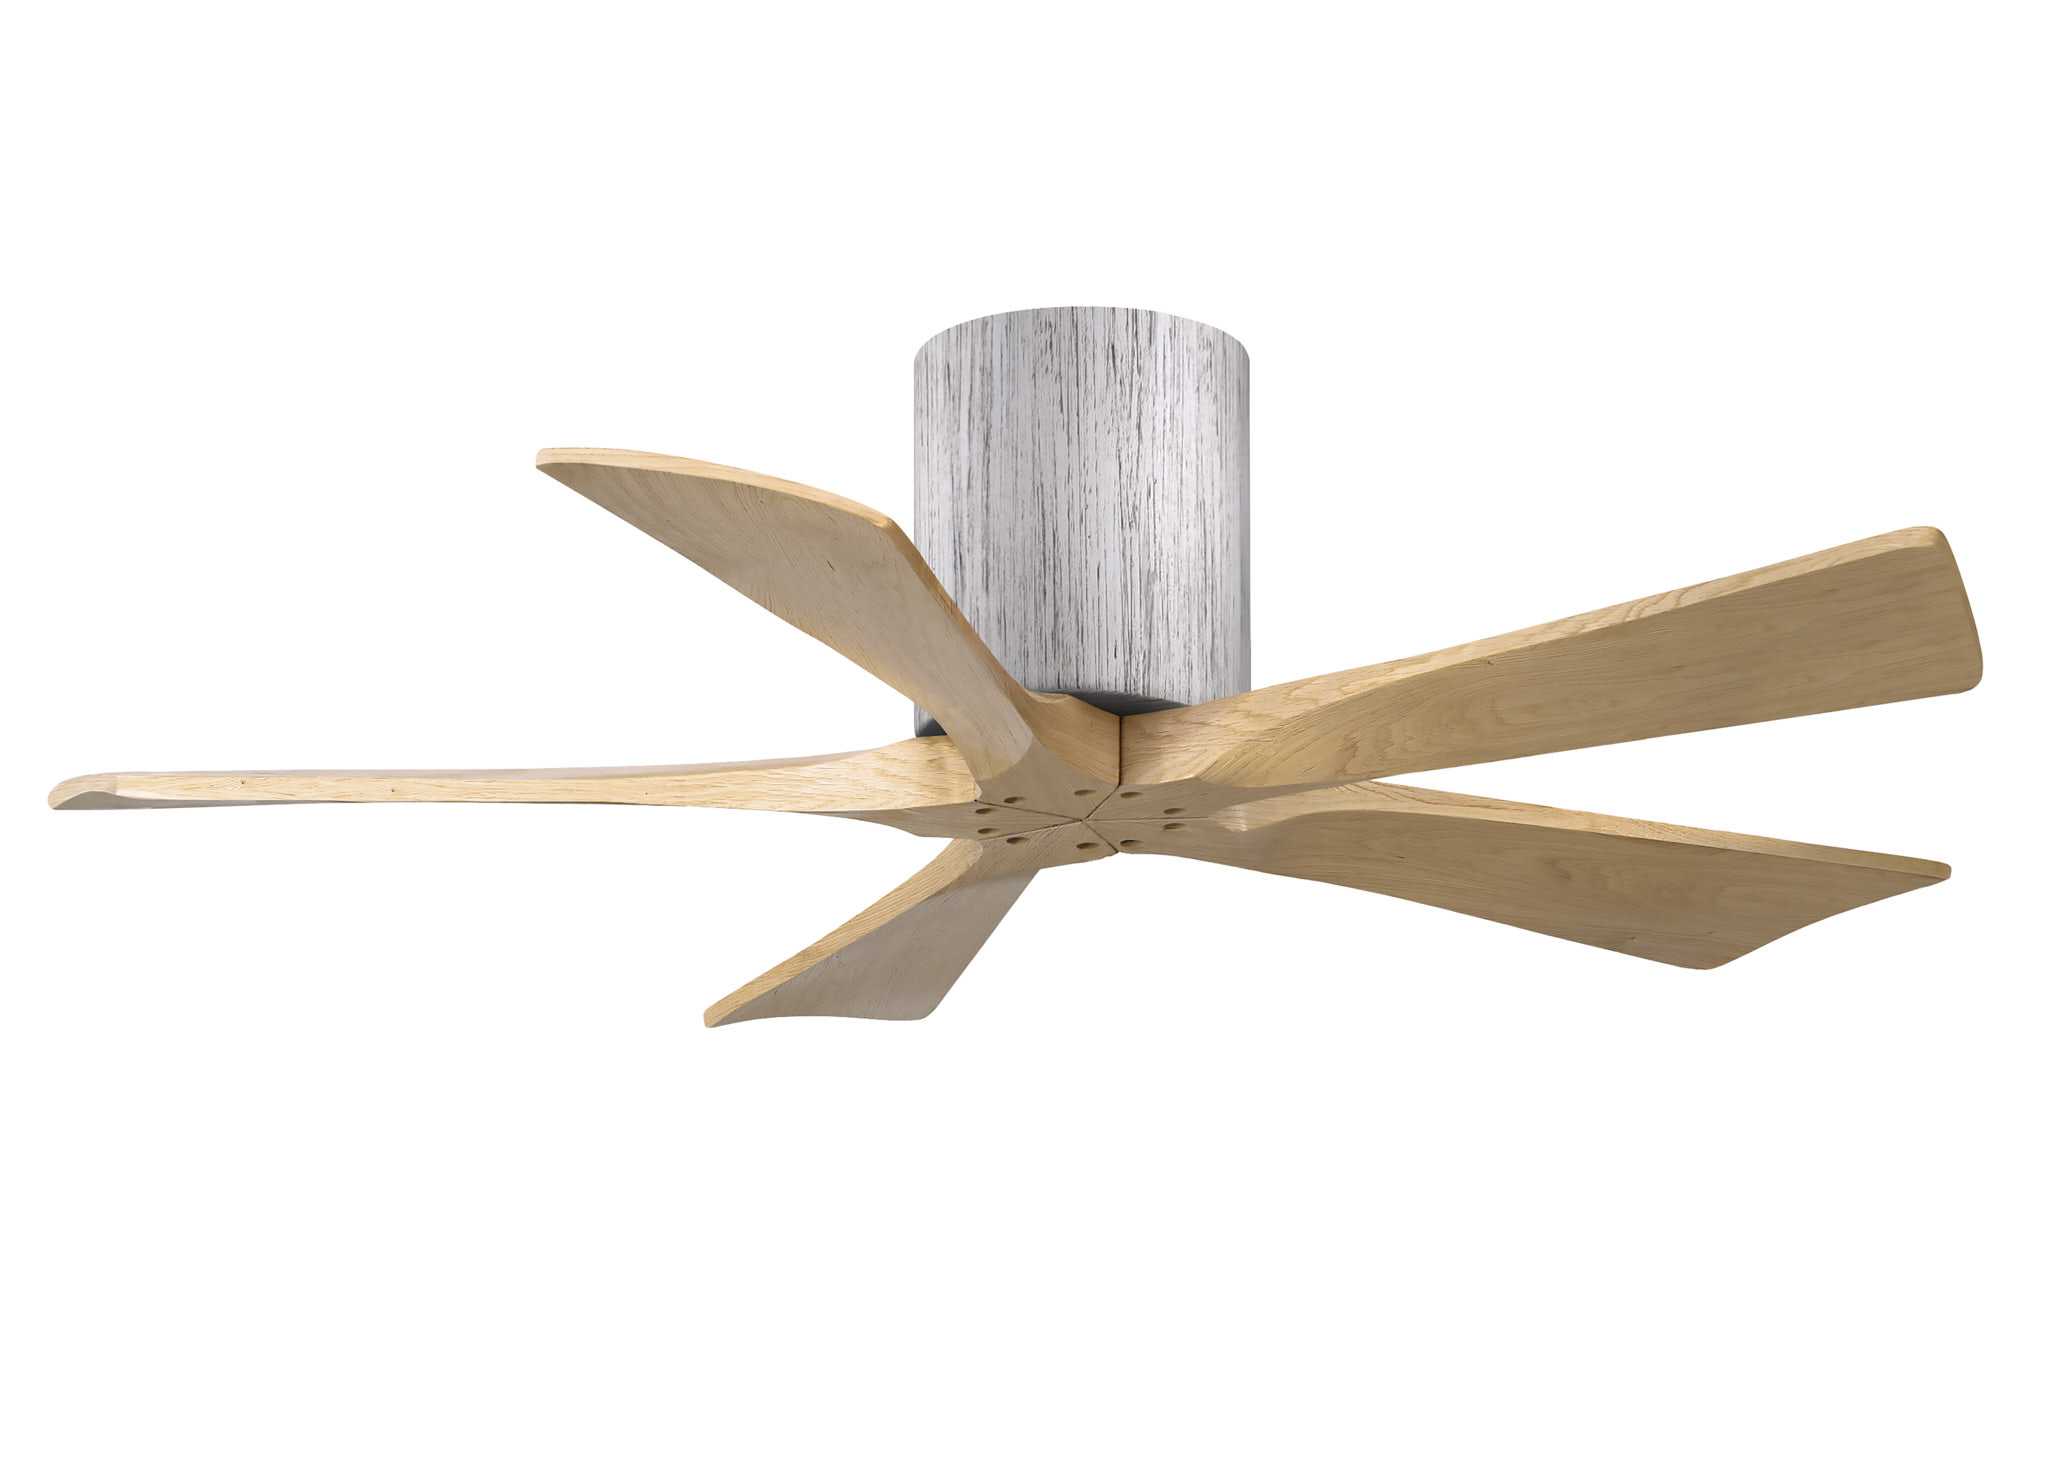 Irene-5H 6-speed ceiling fan in barn wood finish with 42